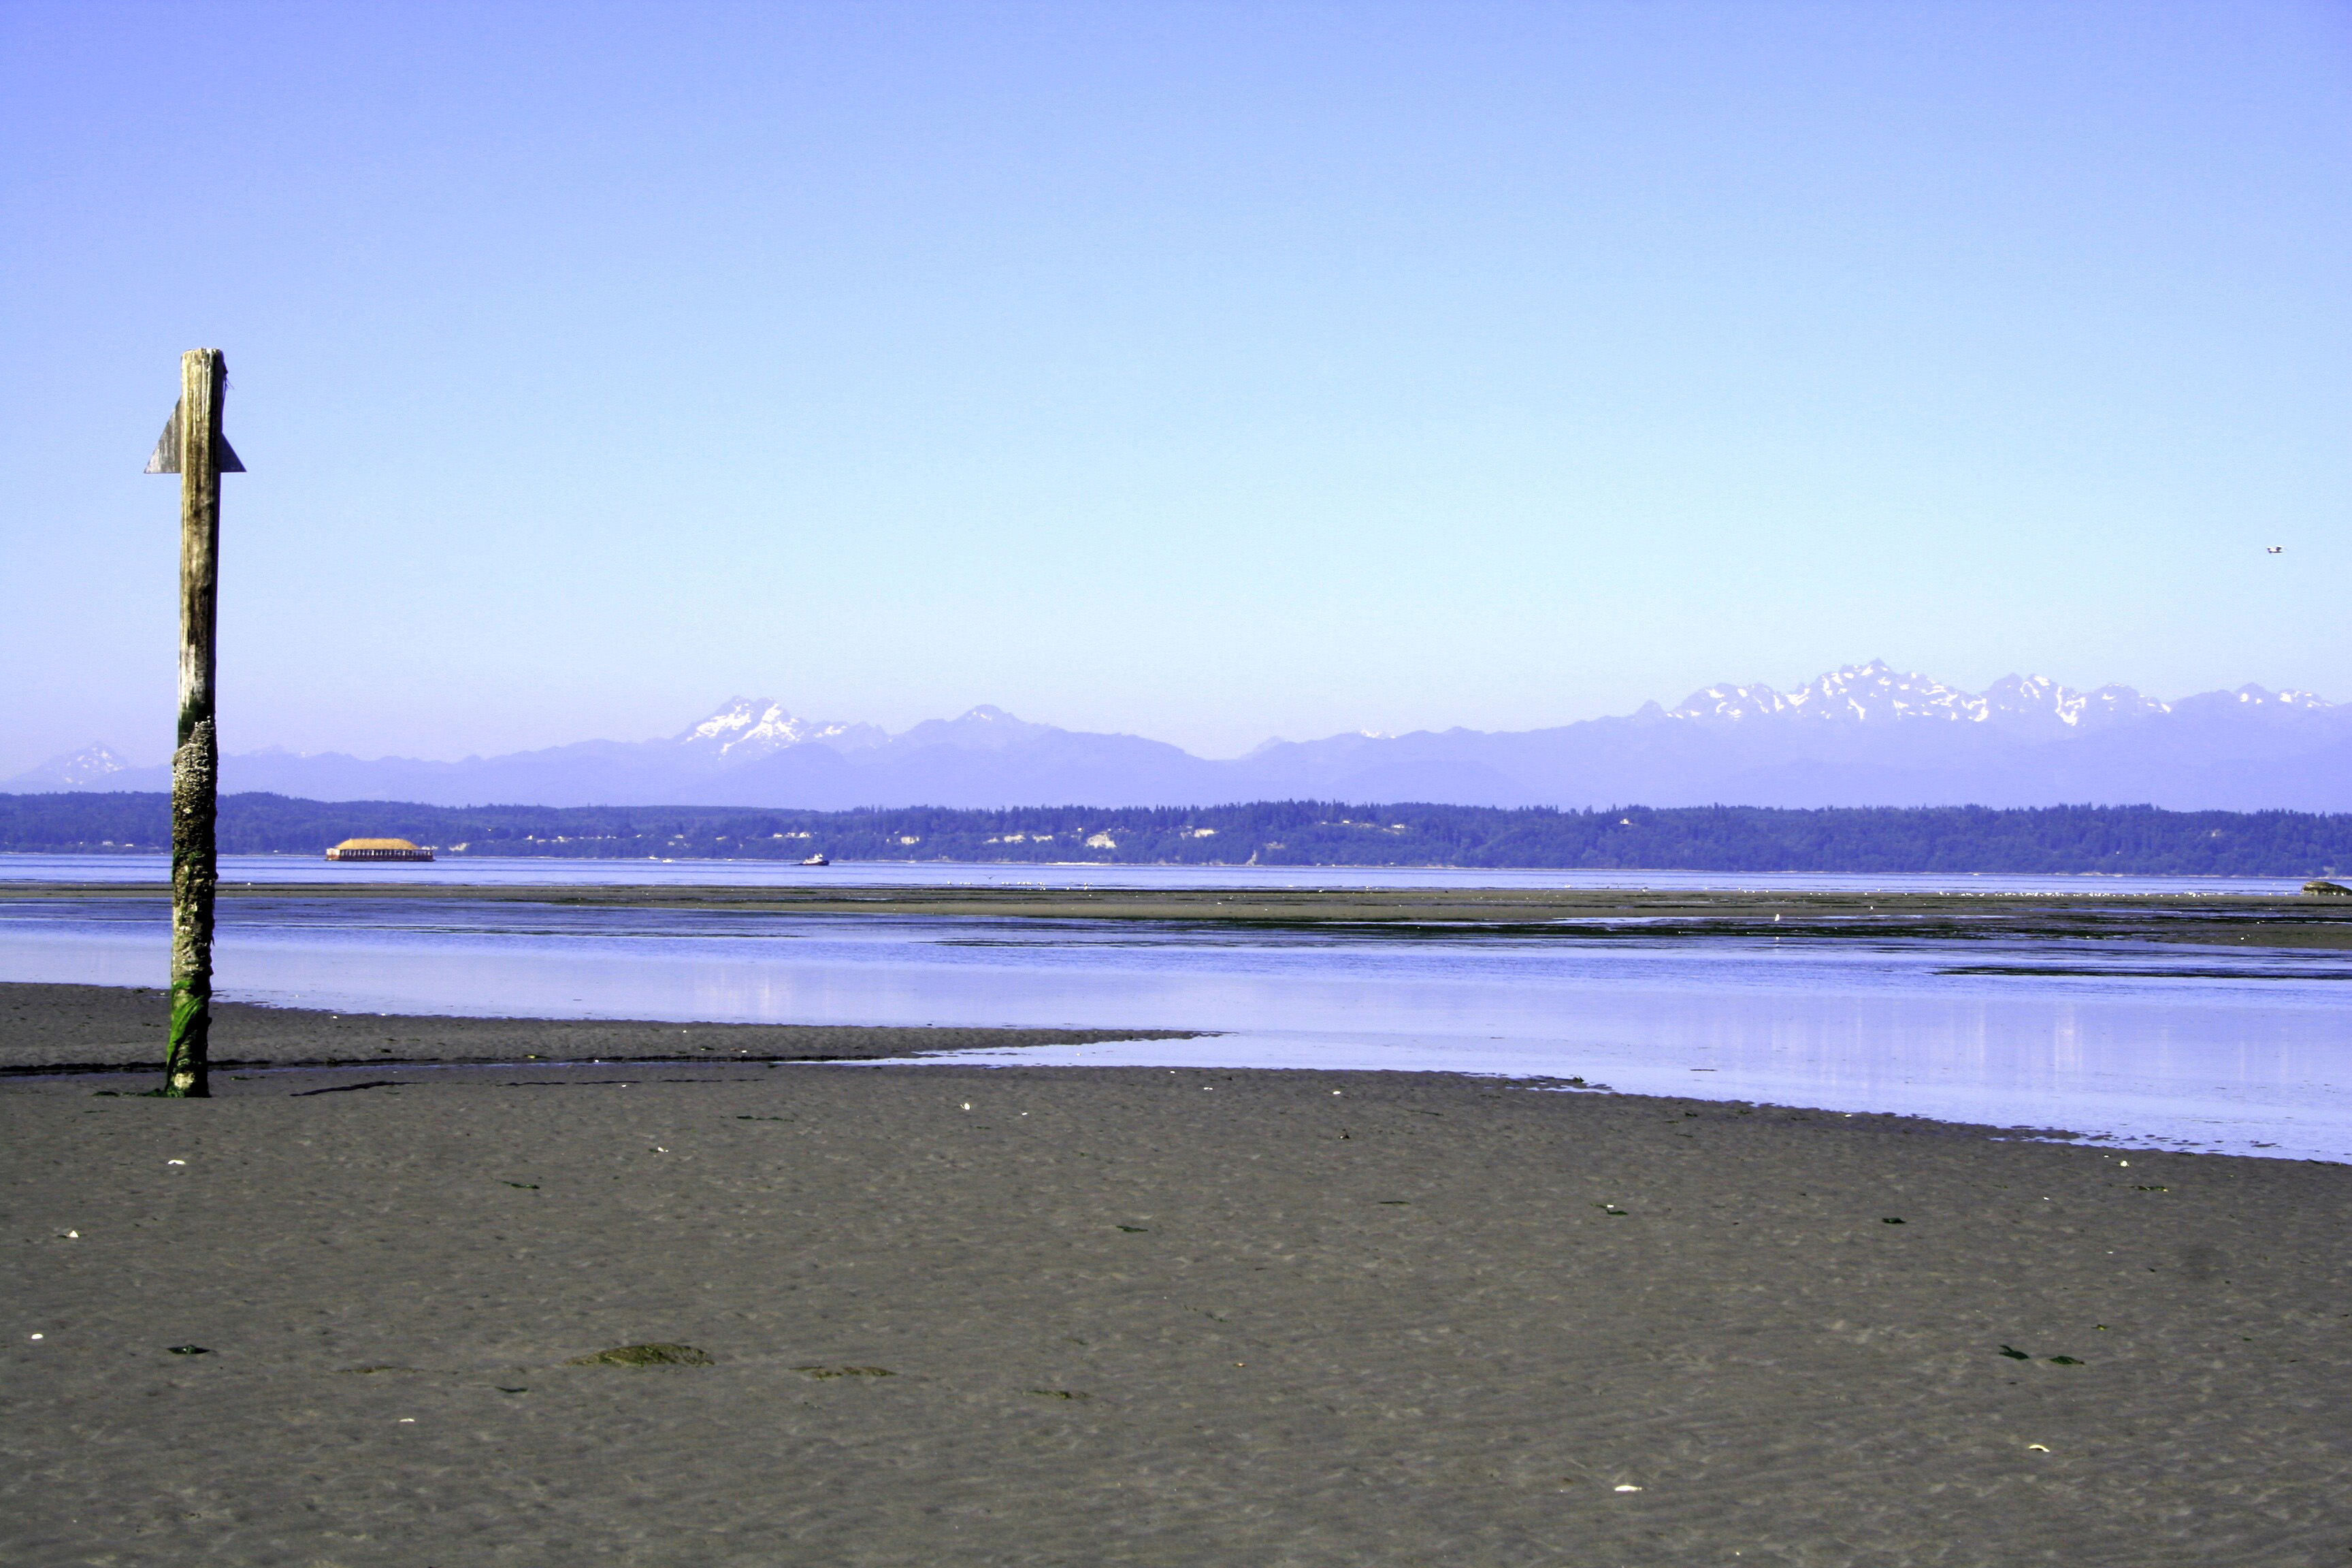 File:Low tide on Whidbey Island.JPG - Wikimedia Commons